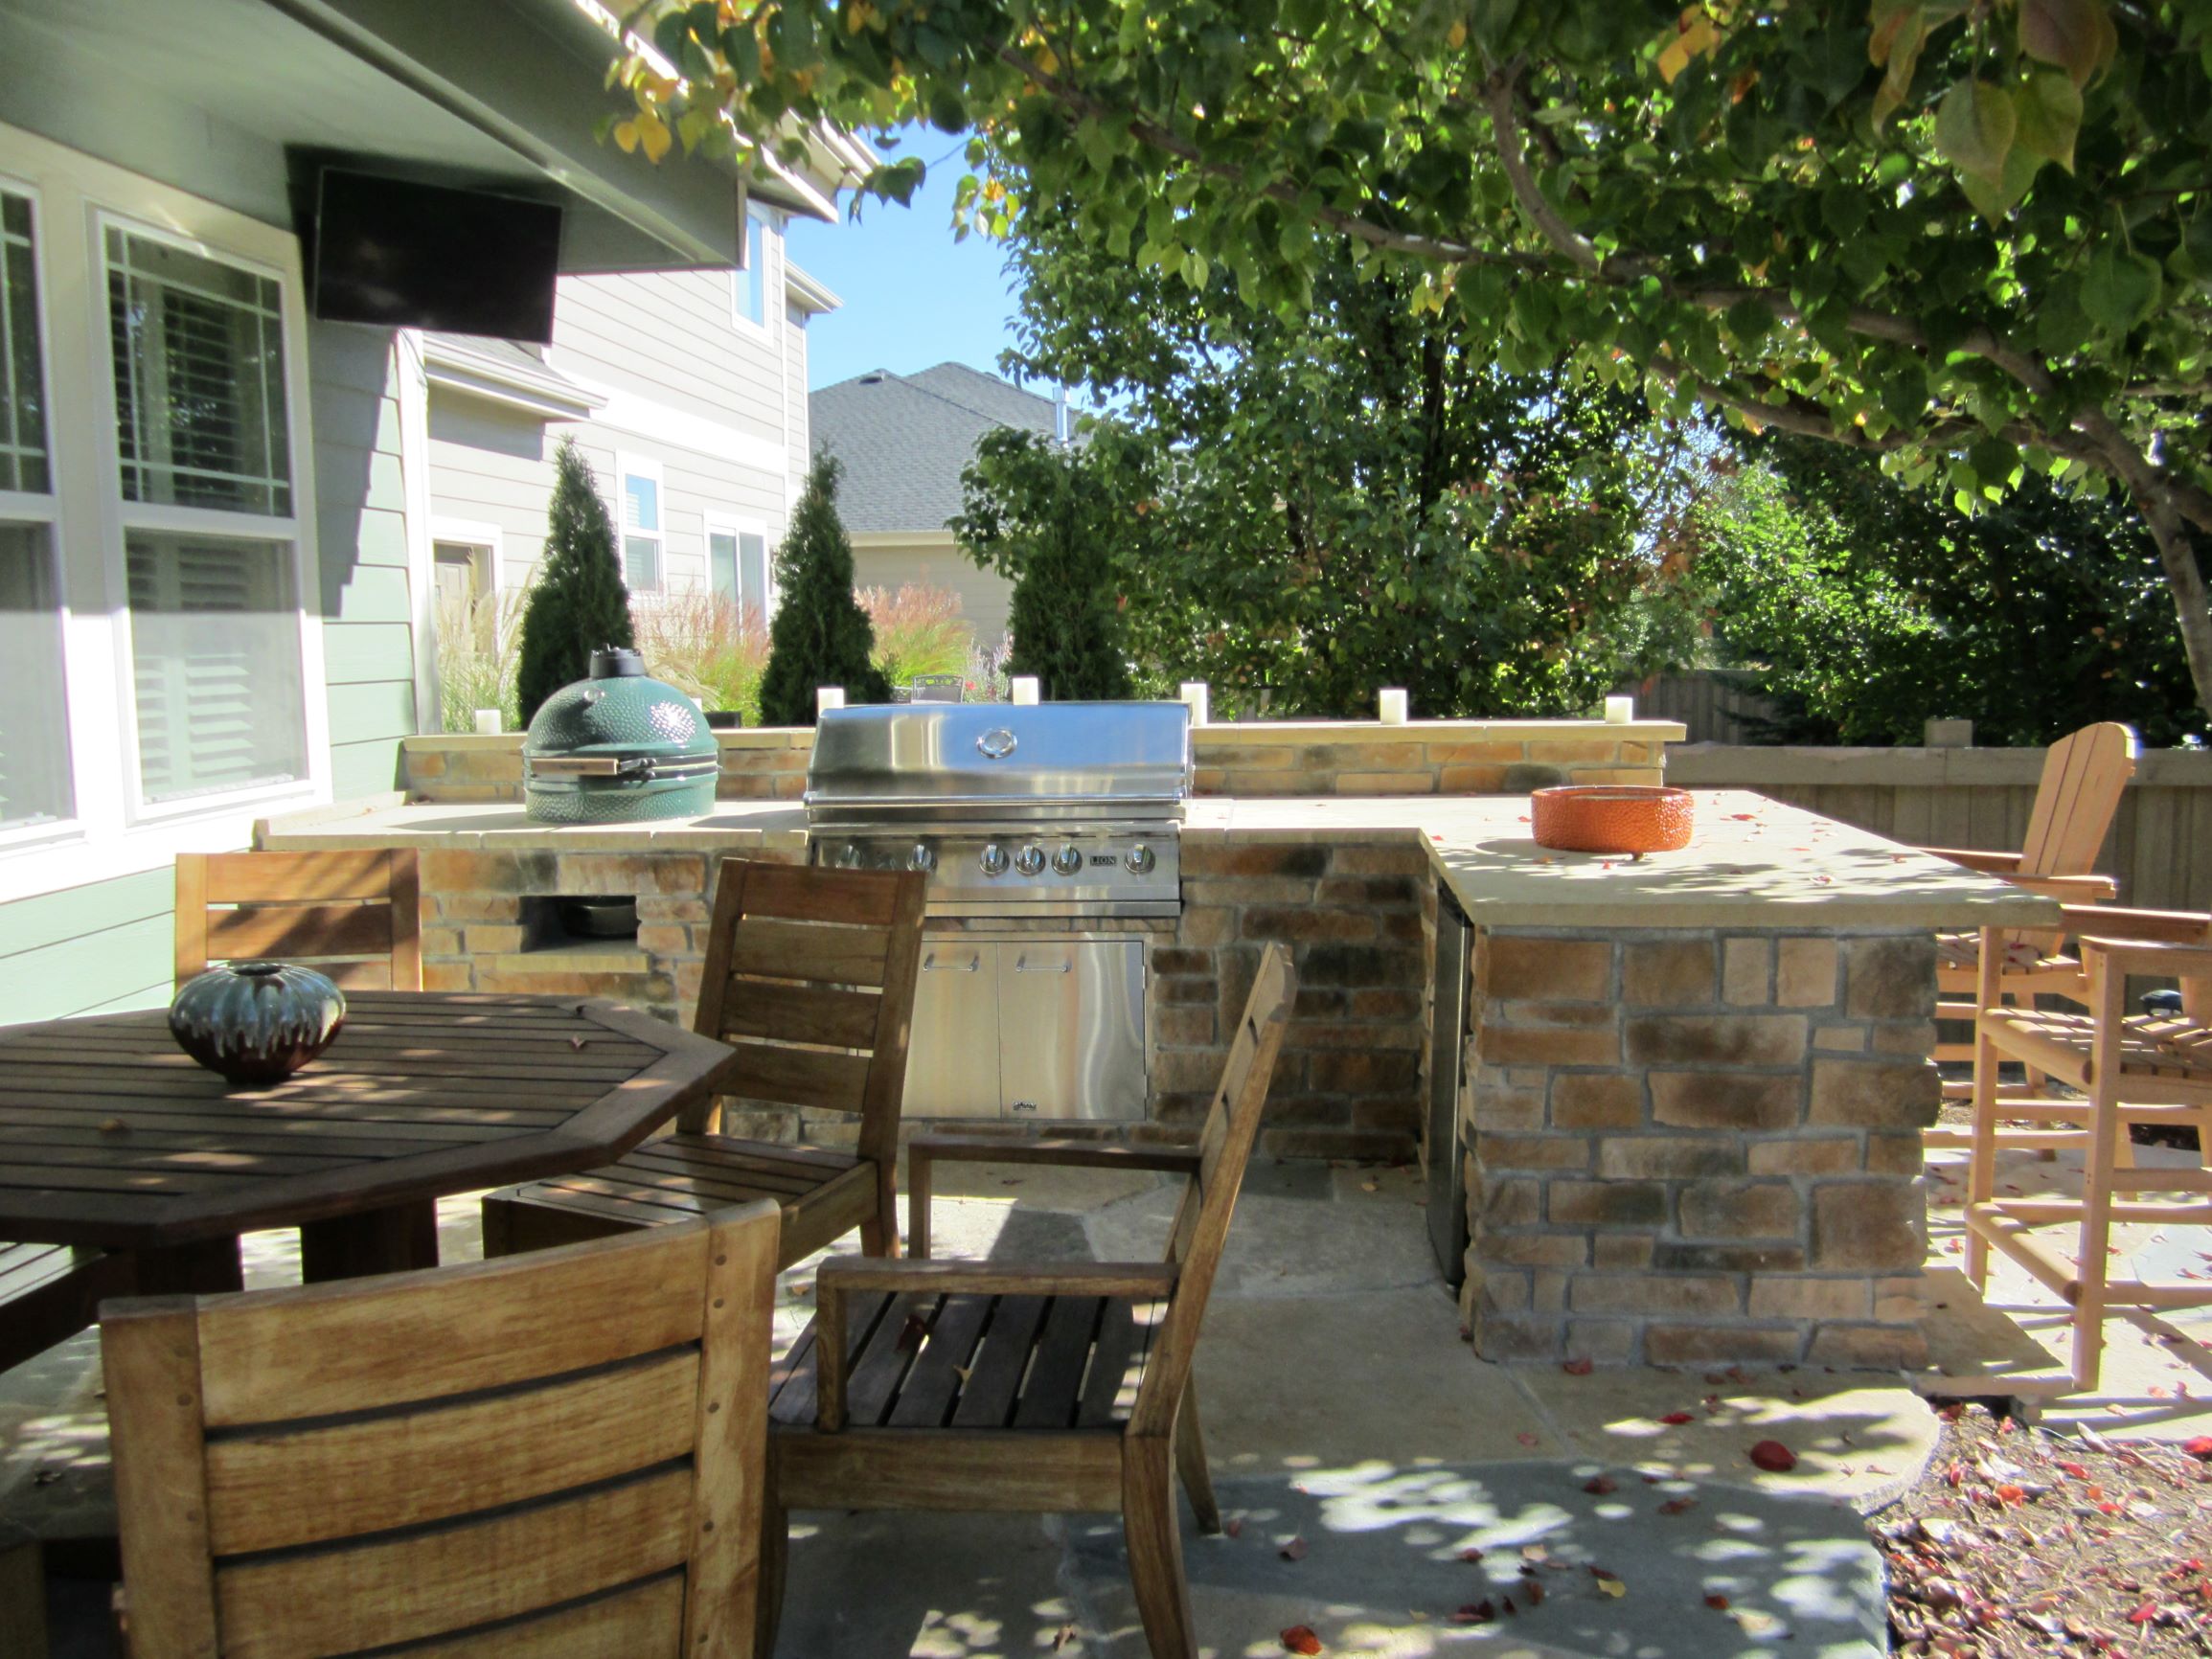 Outdoor grilling station with stone counter tops, adjacent to the outdoor dining area.